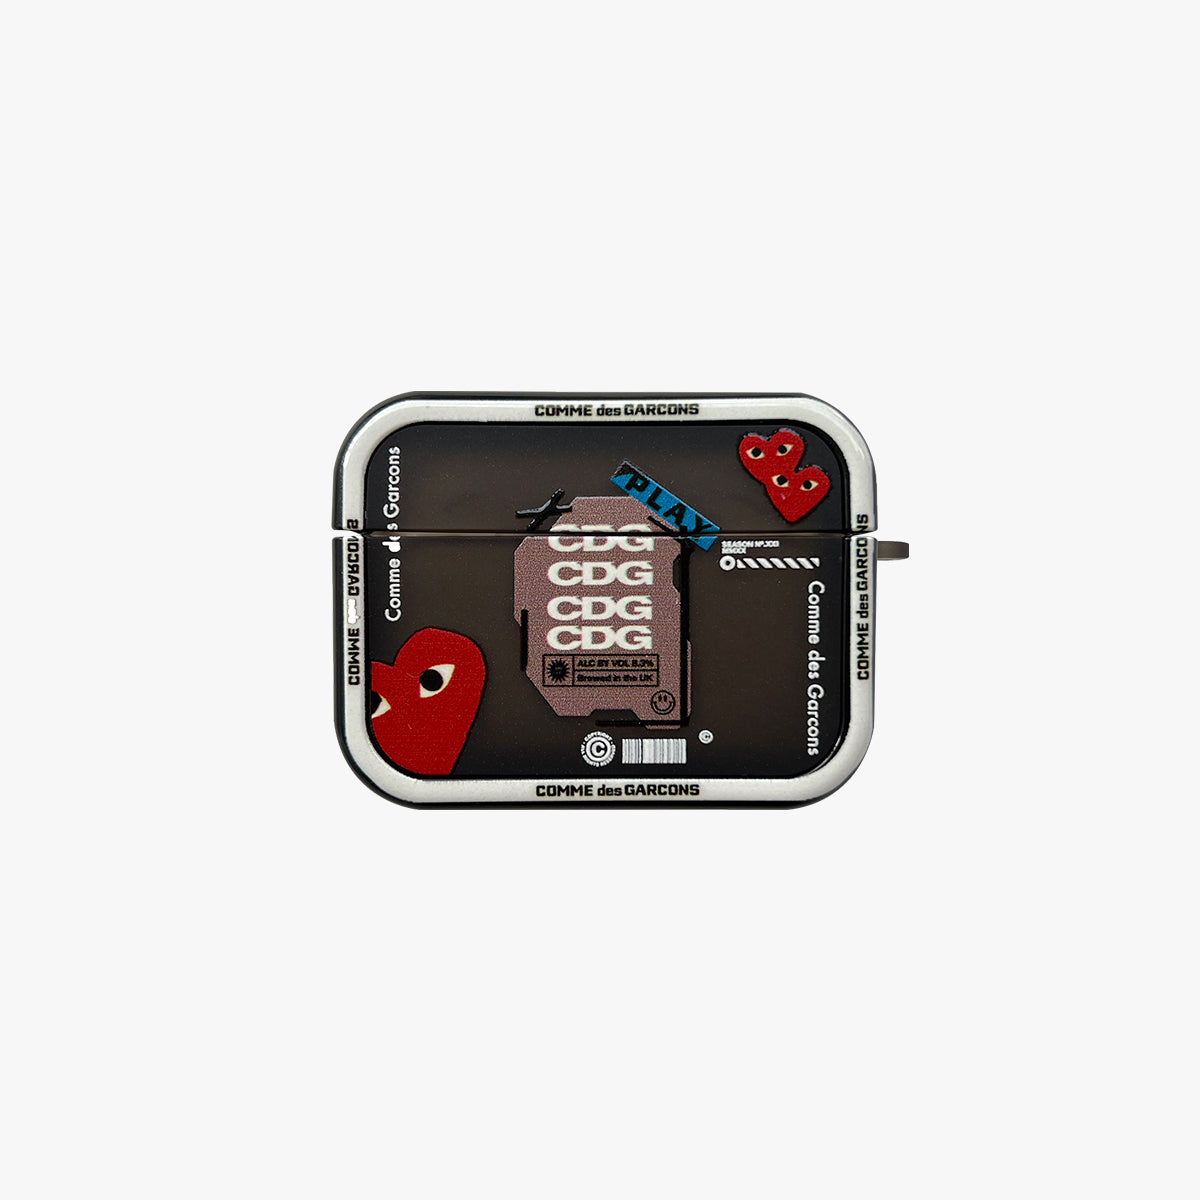 Limited AirPods Case | CDG Tags